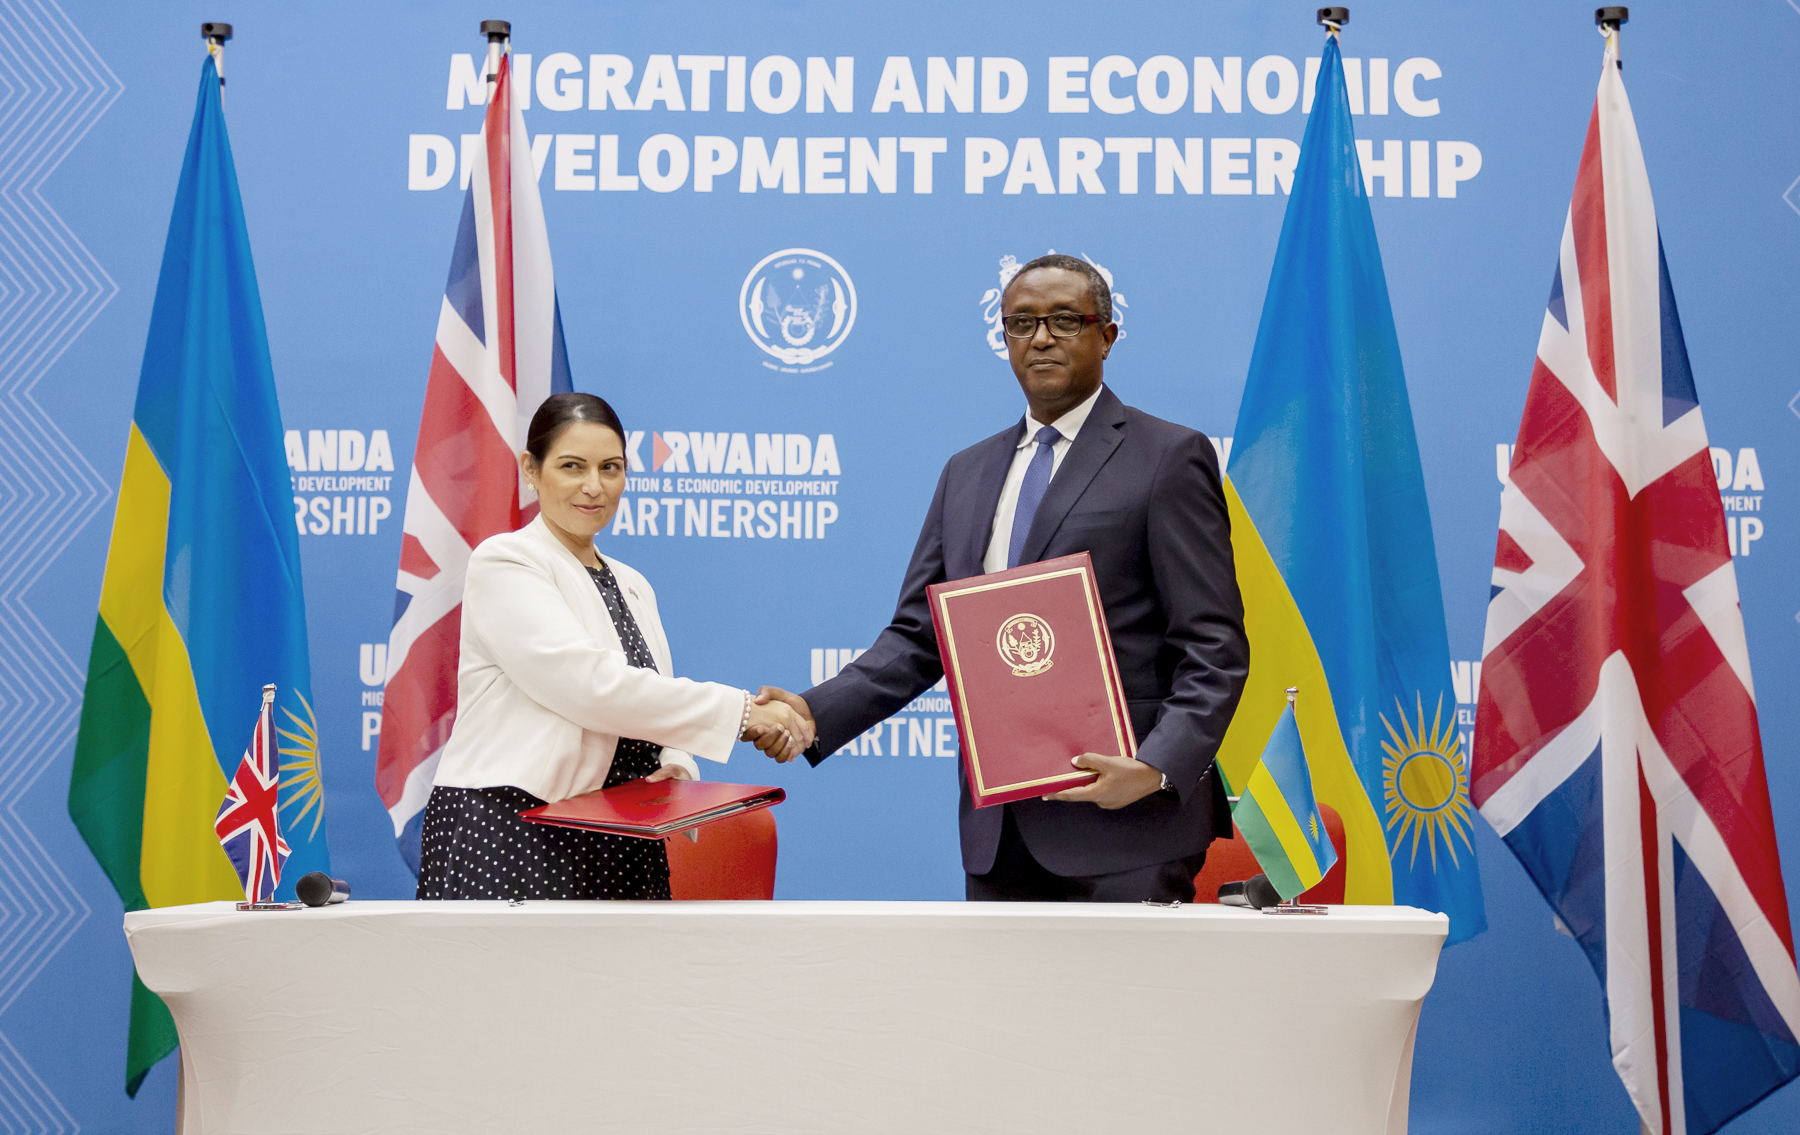 The Minister of Foreign Affairs and International Cooperation Dr. Vincent Biruta and Priti Patel, the Home Secretary of the United Kingdom exchange the documents in Kigali on April 14, 2022.